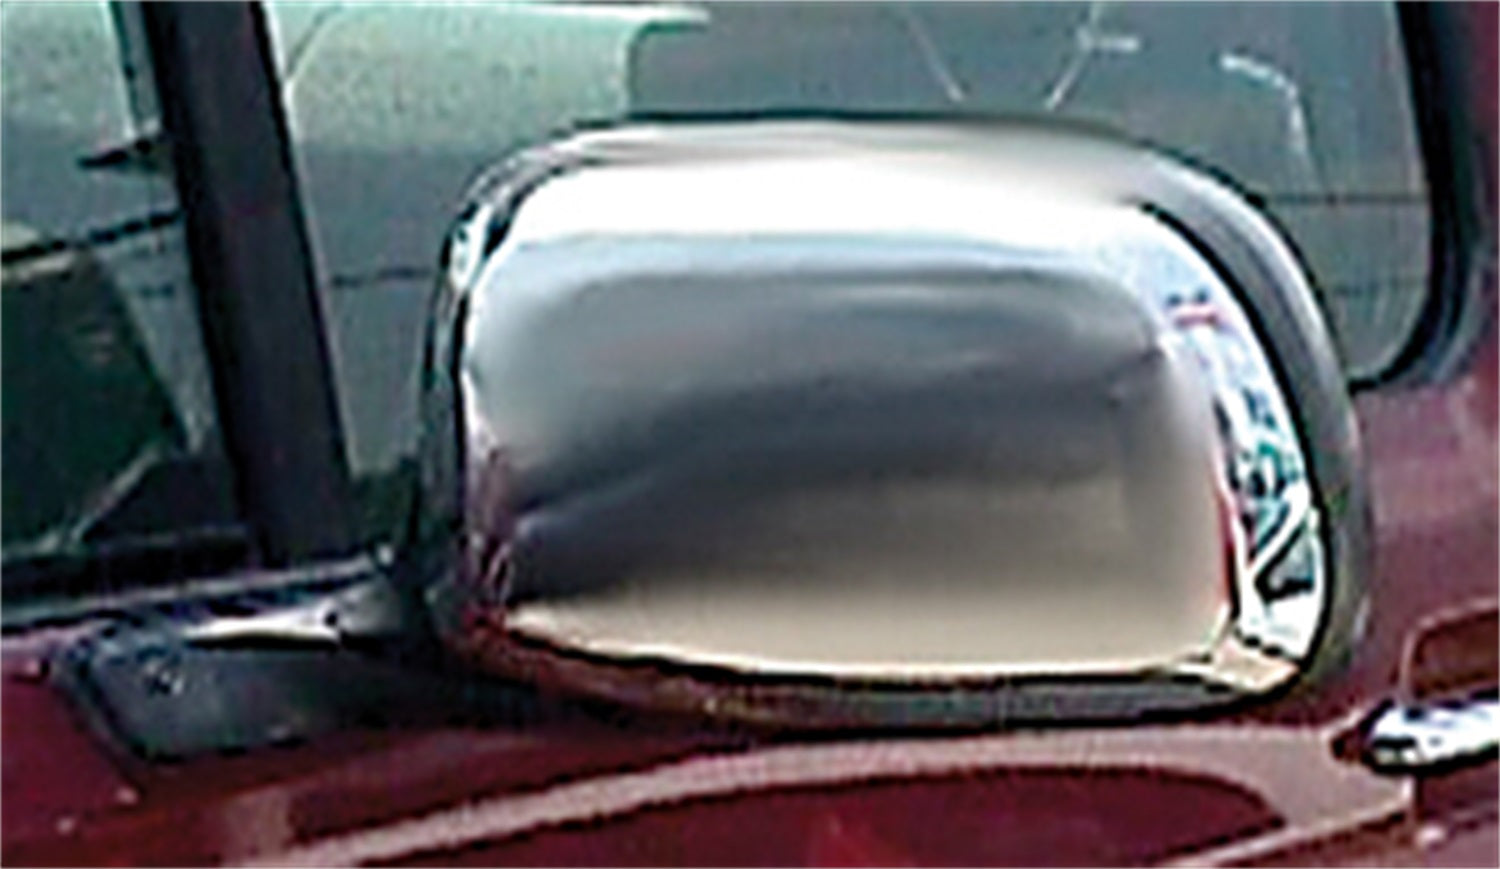 92-96 Ford towing mirror pair